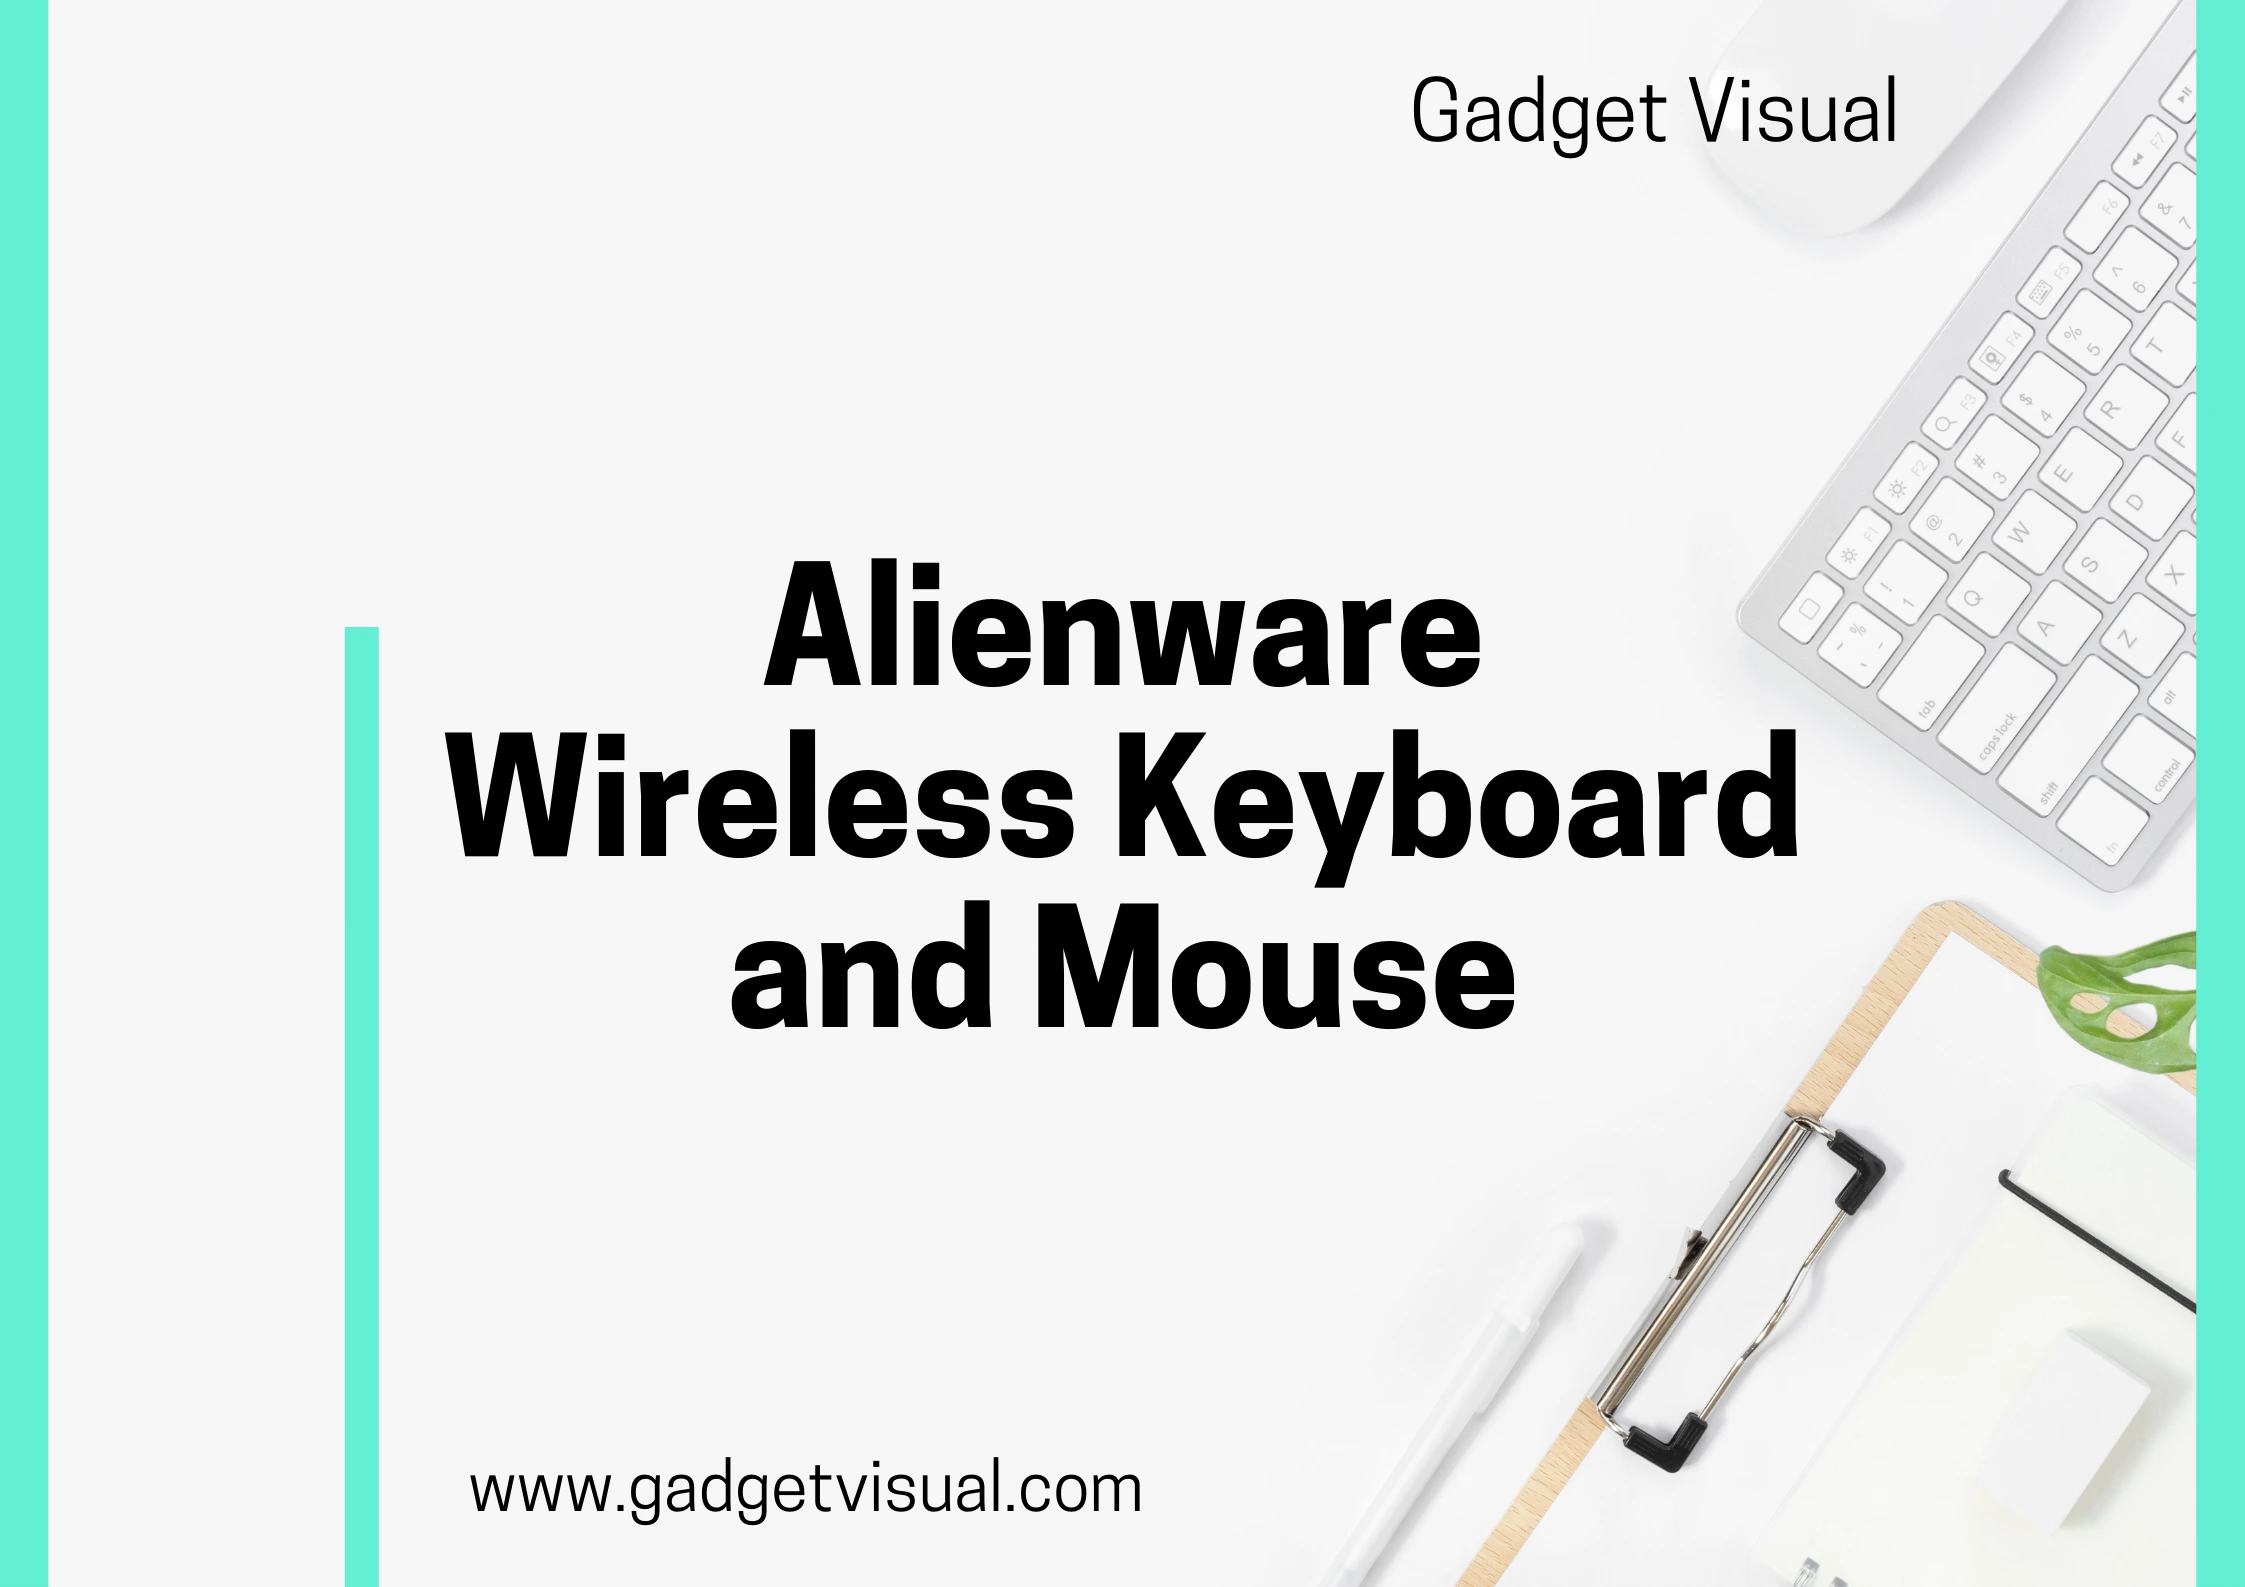 Alienware Wireless Keyboard and Mouse